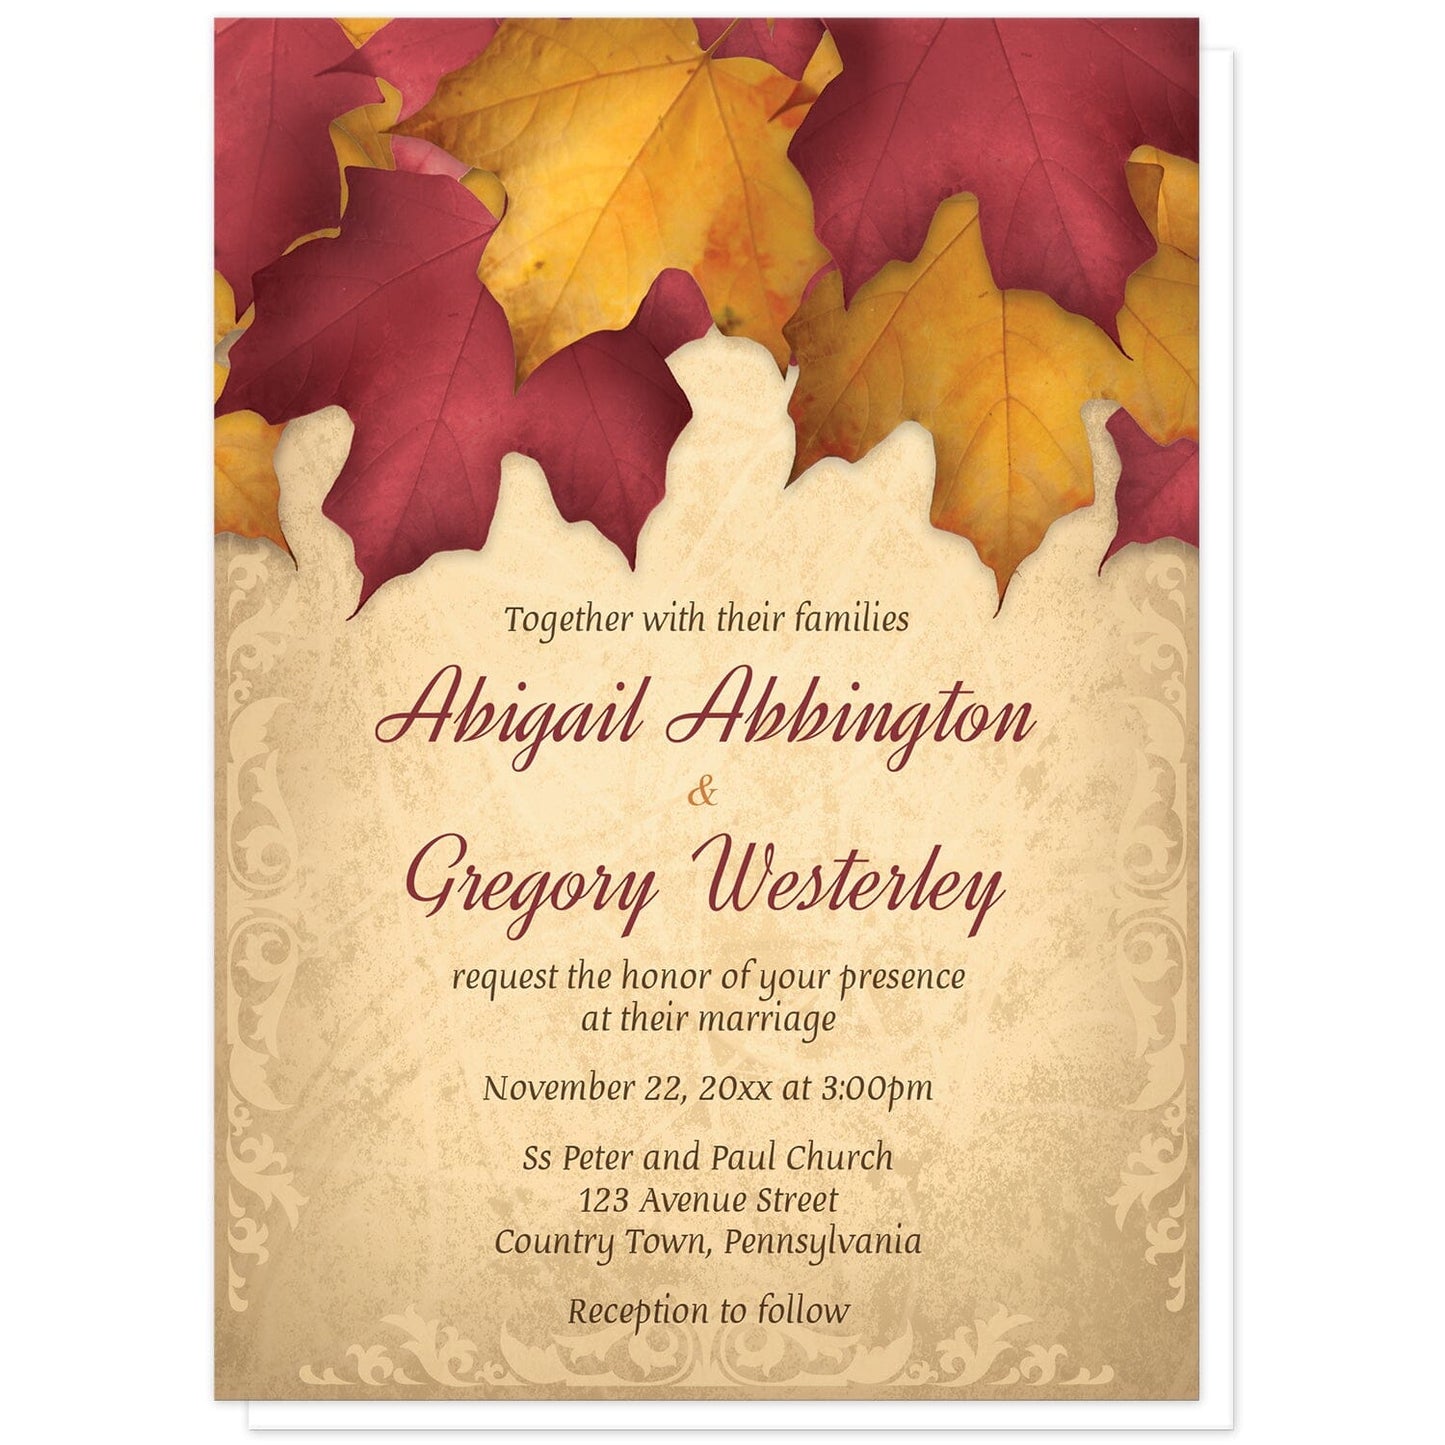 Rustic Burgundy Gold Autumn Wedding Invitations at Artistically Invited. Rustic burgundy gold autumn wedding invitations with an arrangement of burgundy and gold fall leaves along the top over a beautiful gold colored background with elegant flourishes along the edges. Your personalized marriage celebration details are custom printed in burgundy and brown over the gold background.